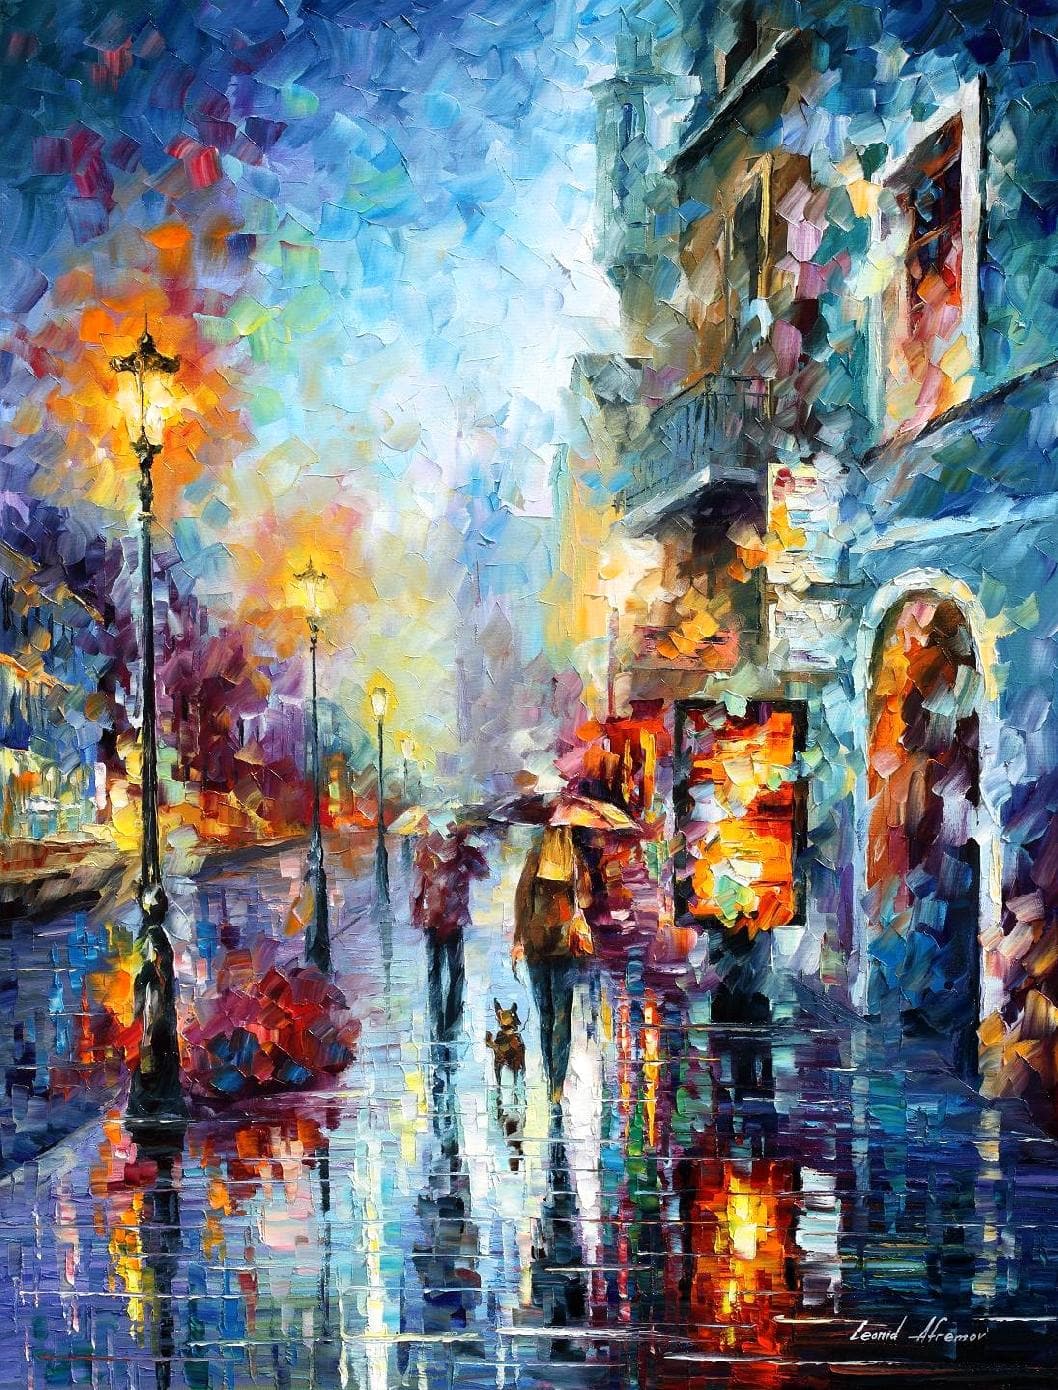 Leonid Afremov MELODY OF PASSION Puzzle Painting